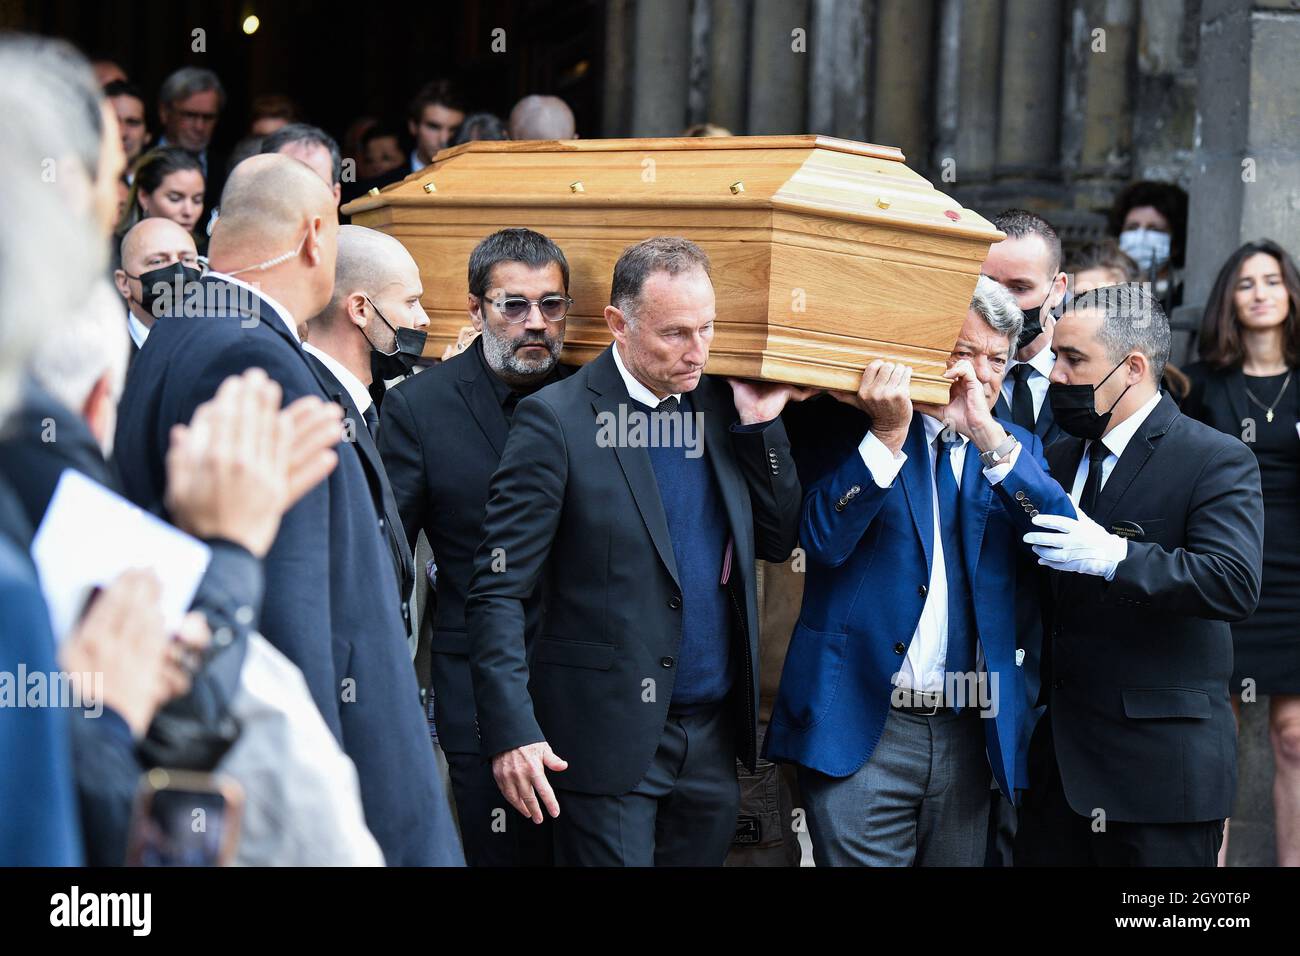 Stephane Tapie, Jean-Pierre Papin and Jean-Louis Borloo, Claude Lelouch  carry the coffin during a tribute mass for French tycoon Bernard Tapie at  Saint Germain des Pres church in Paris, France on October